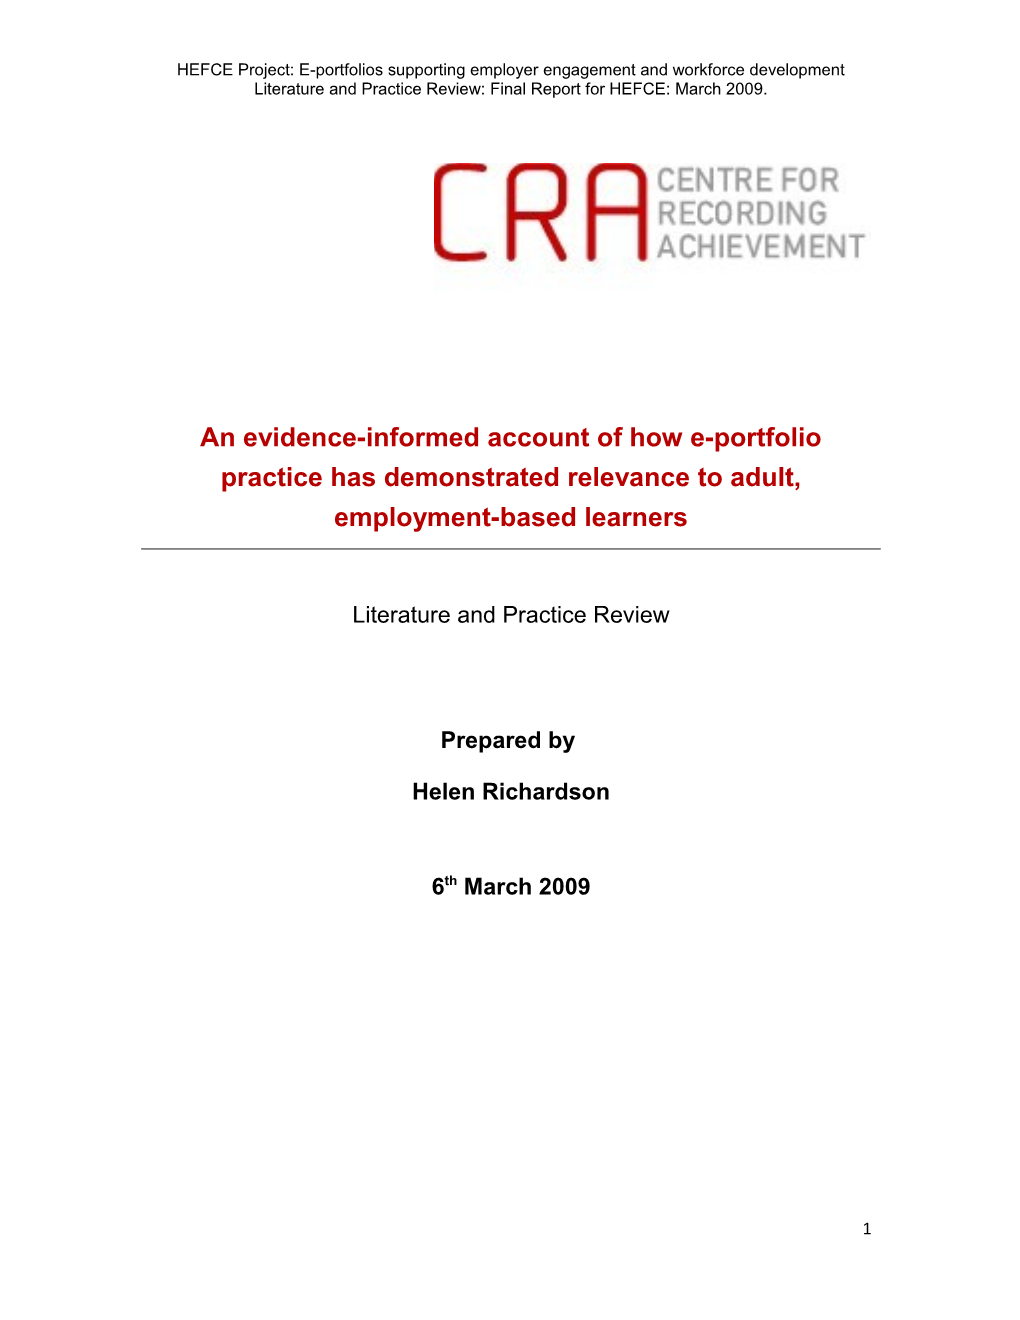 An Evidence-Informed Account of How Portfolio Practice Has Demonstrated Relevance to Adult